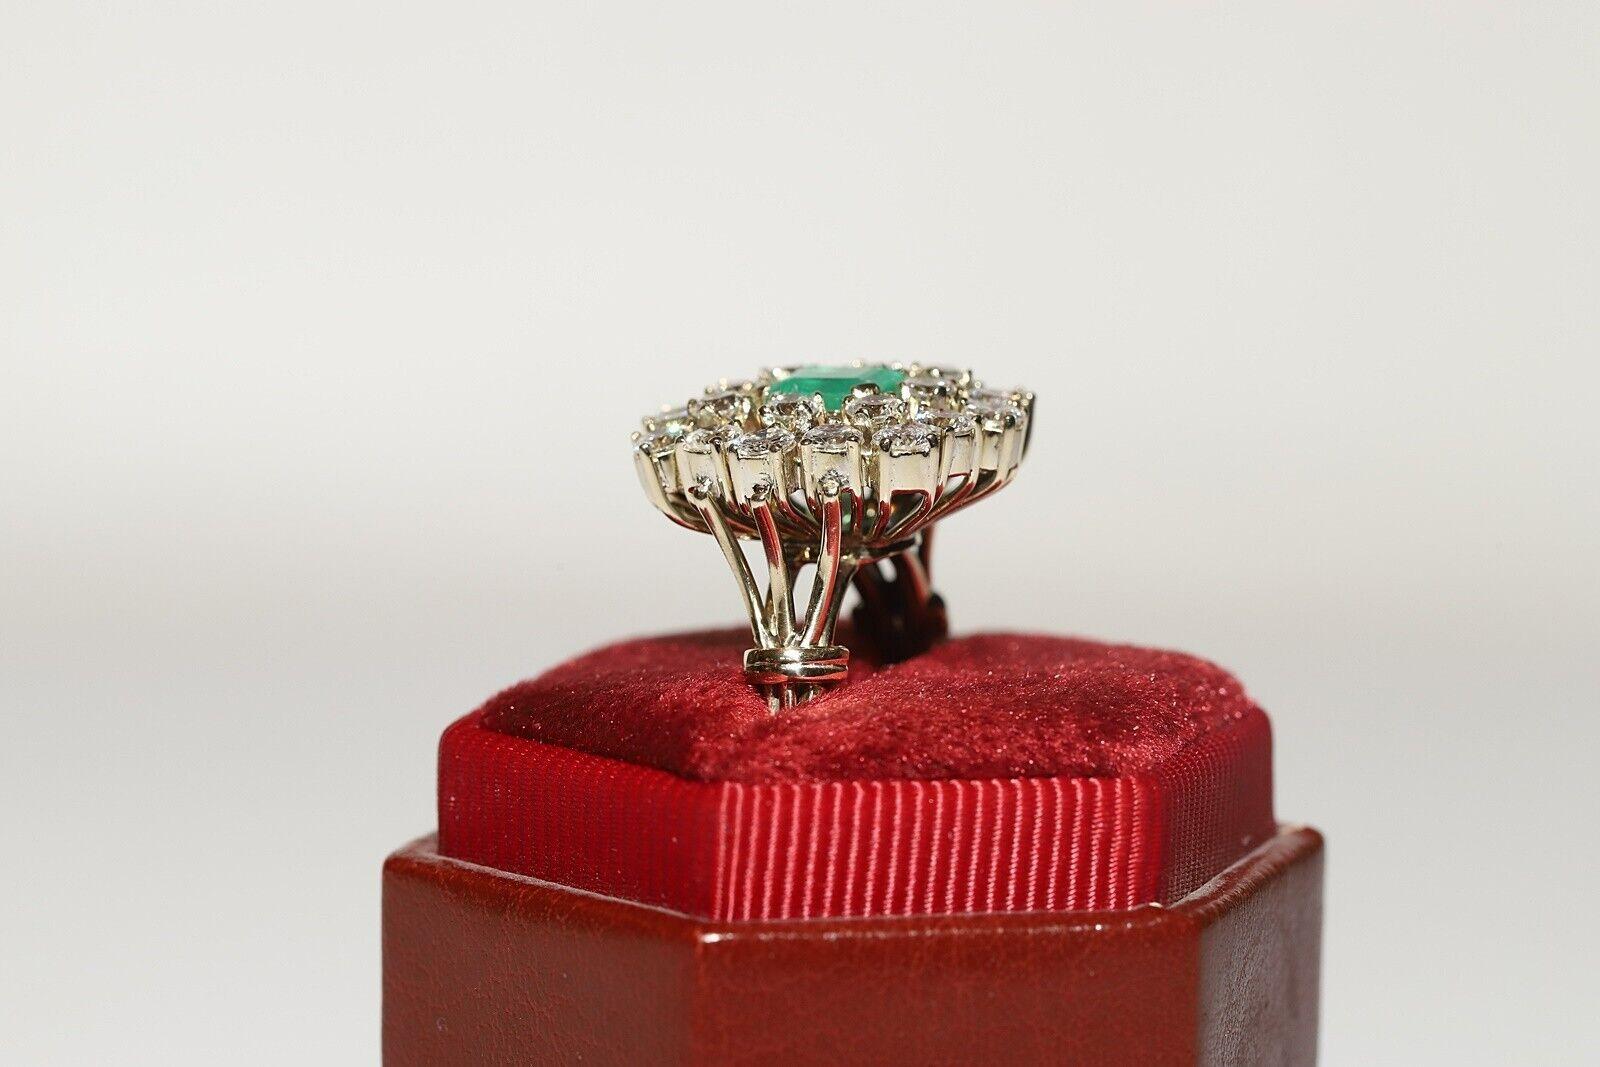 Vintage Circa 1970s 14k Gold Natural Diamond And Emerald Decorated Ring For Sale 7